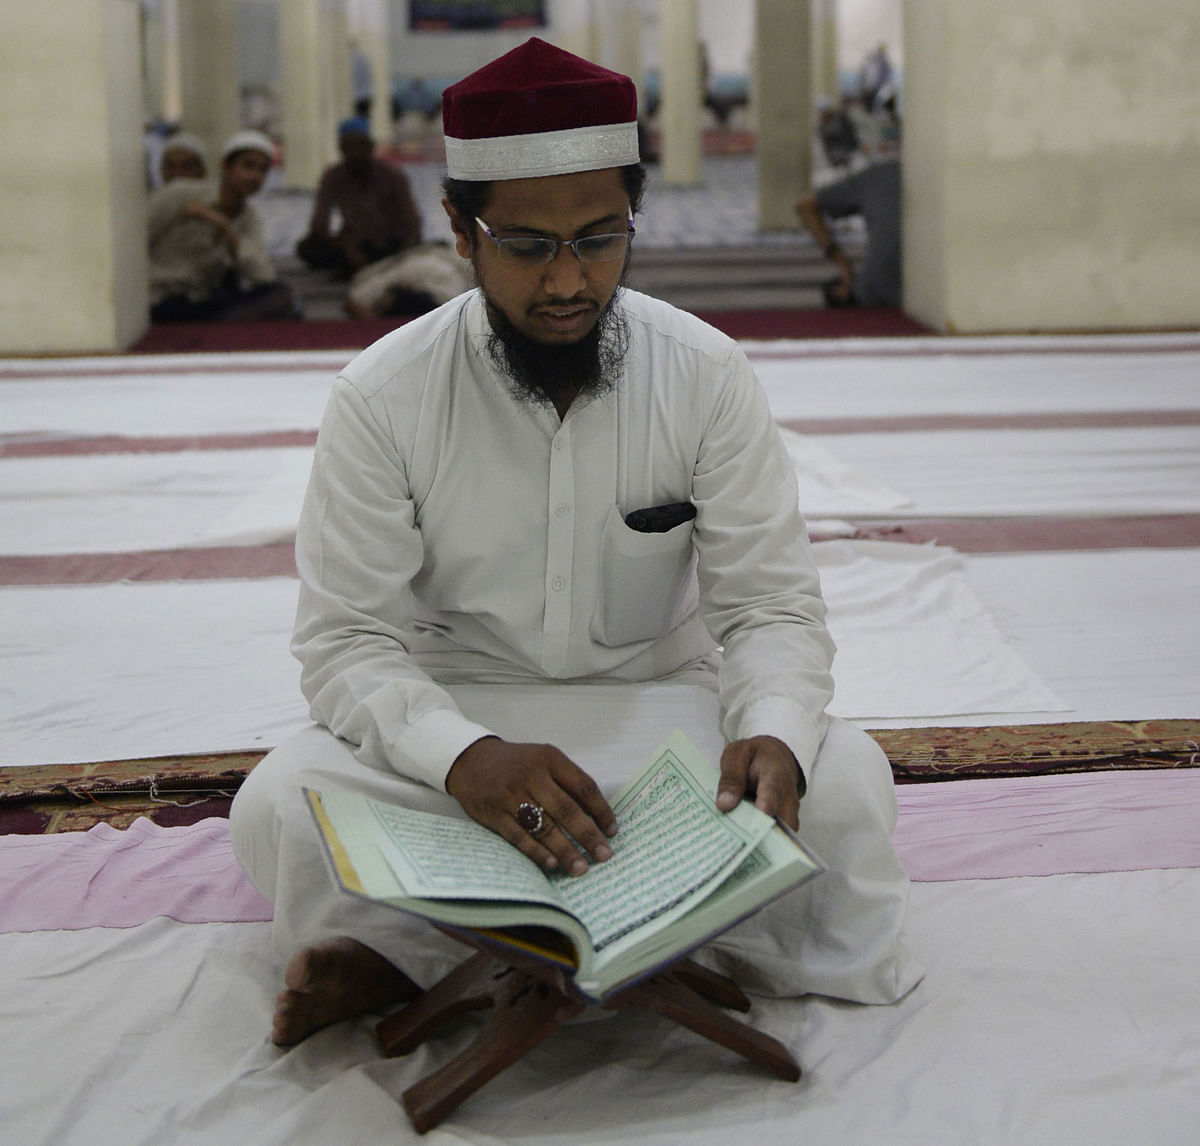 An Indian Muslim devotee reads the Quran prior to breaking his fast during the Holy month of Ramadan at the Jama Masjid in Secunderabad, the twin city of Hyderabad on 1 June 2018. Photo: AFP